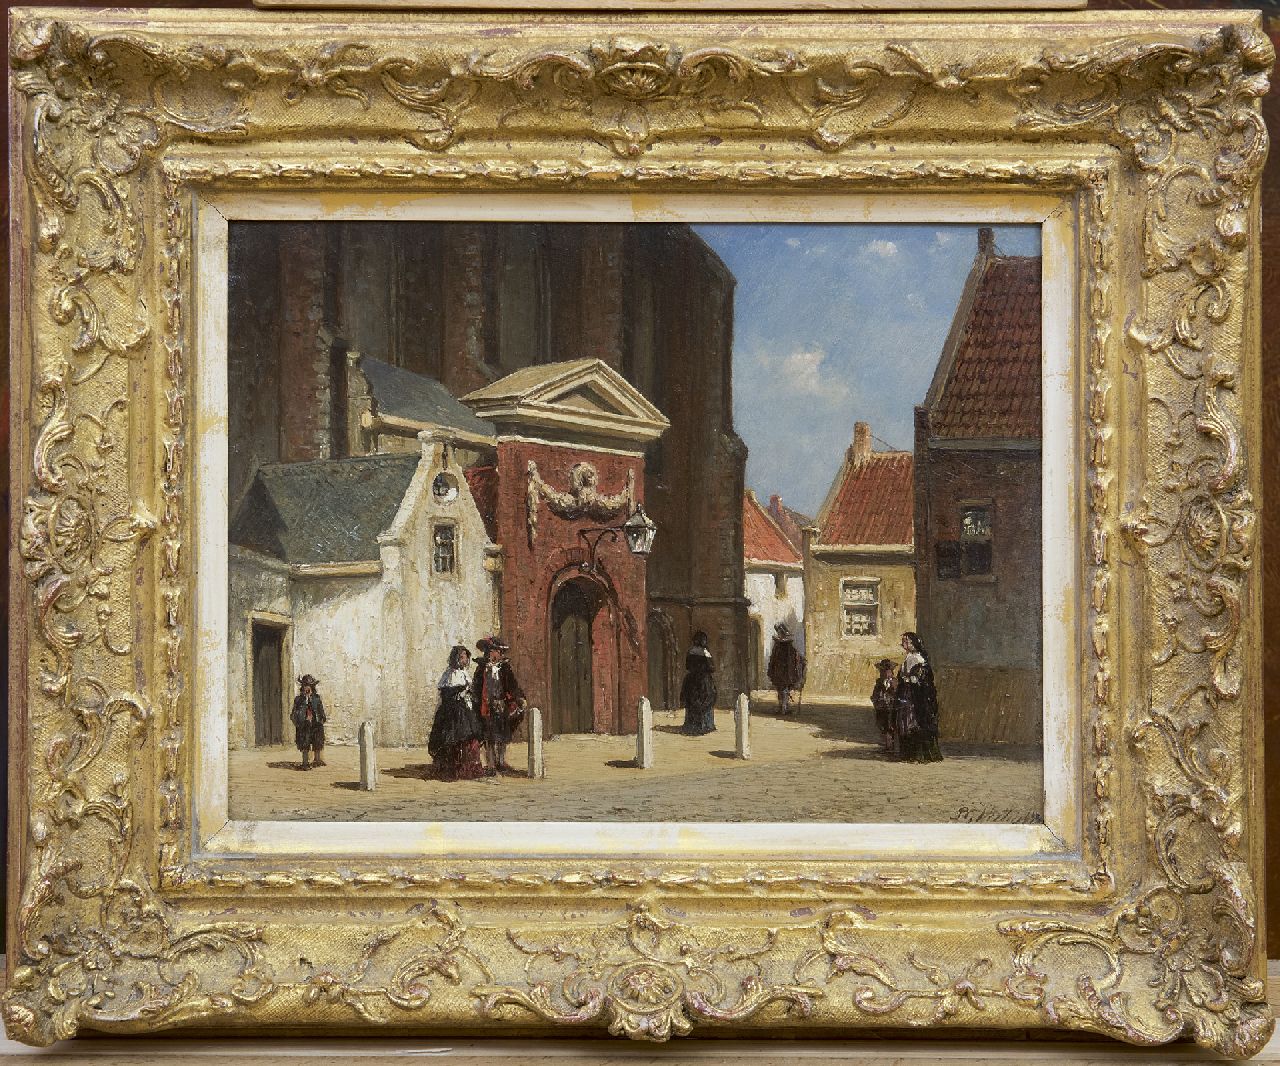 Vertin P.G.  | Petrus Gerardus Vertin | Paintings offered for sale | View of the 'Waalse Kerk' Haarlem, oil on panel 19.0 x 25.0 cm, signed l.r.